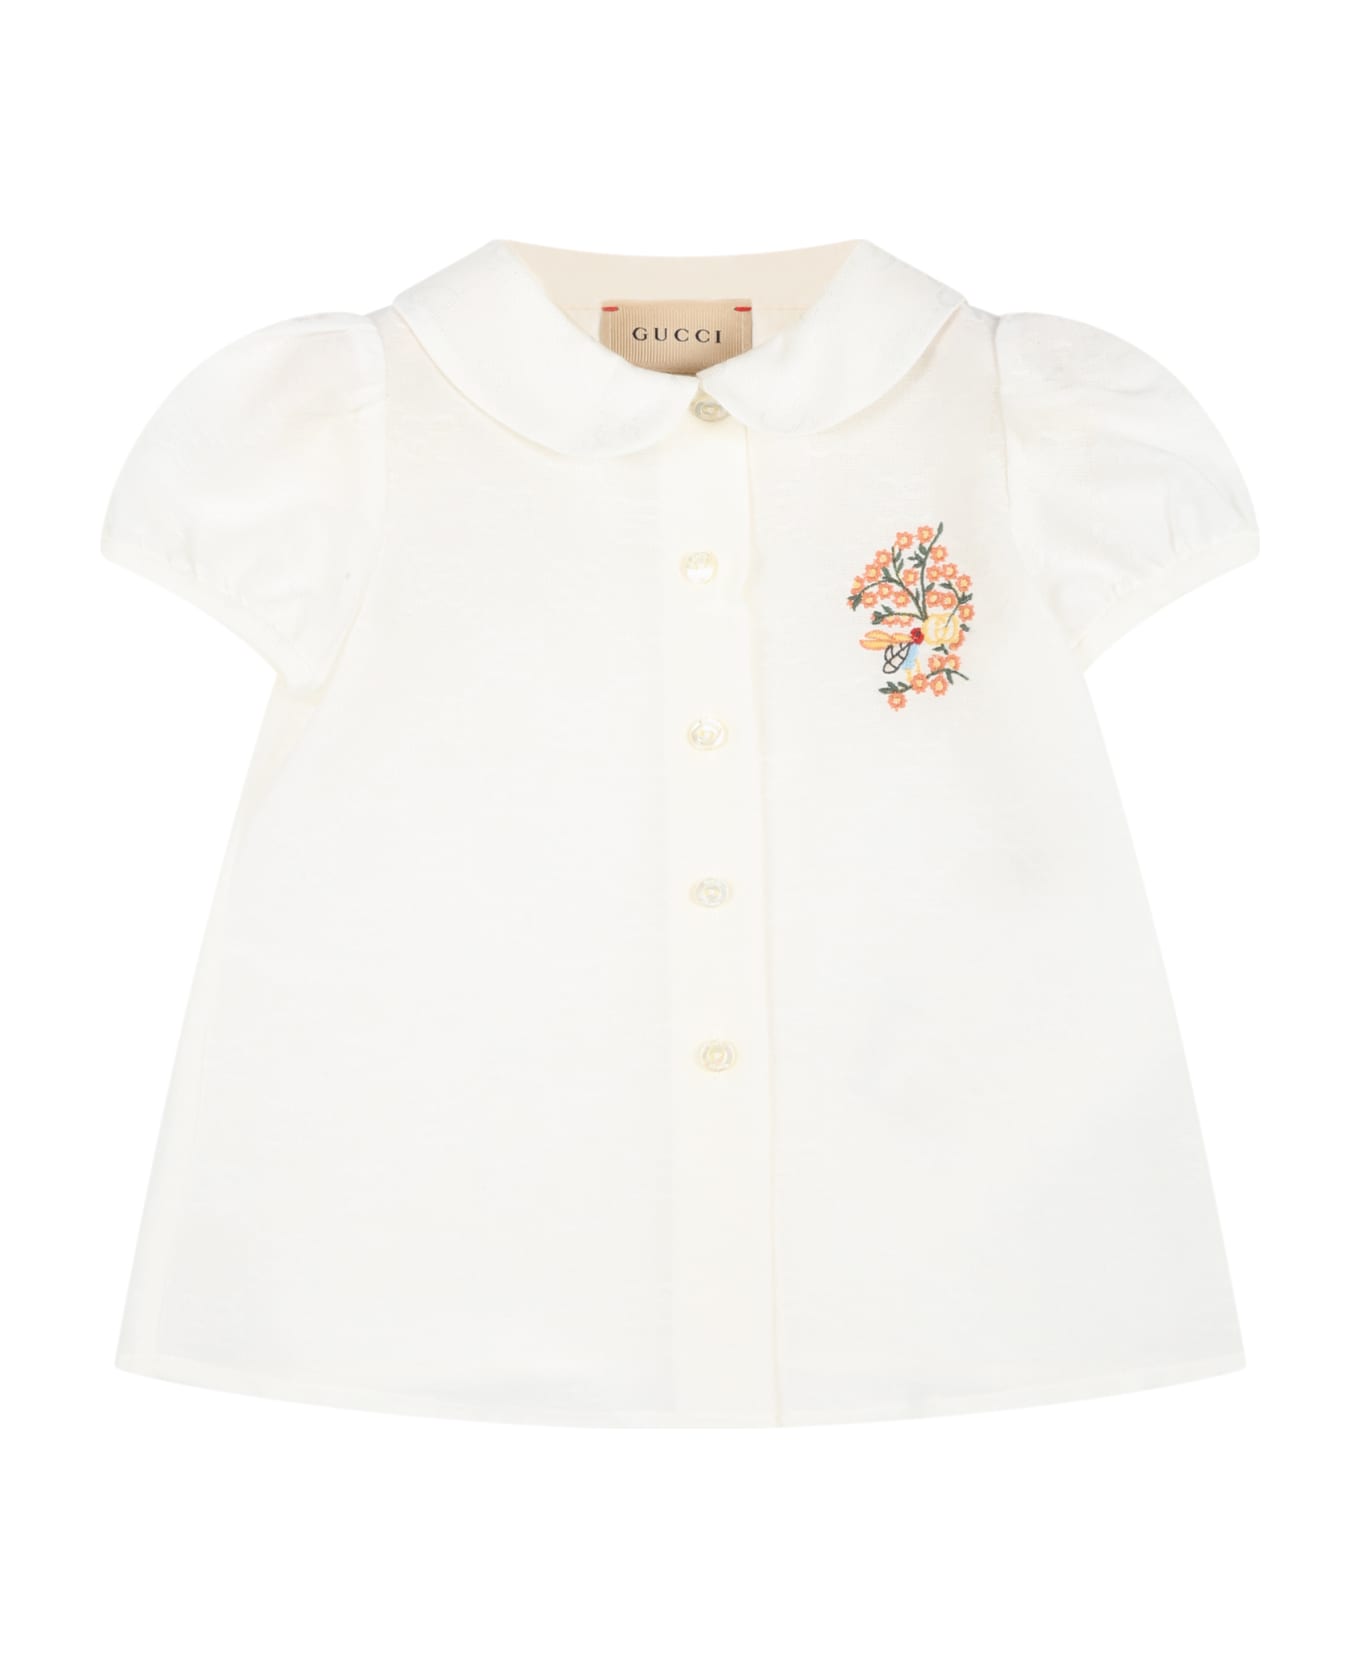 Gucci White Shirt For Baby Girl With Flowers And Logo - White